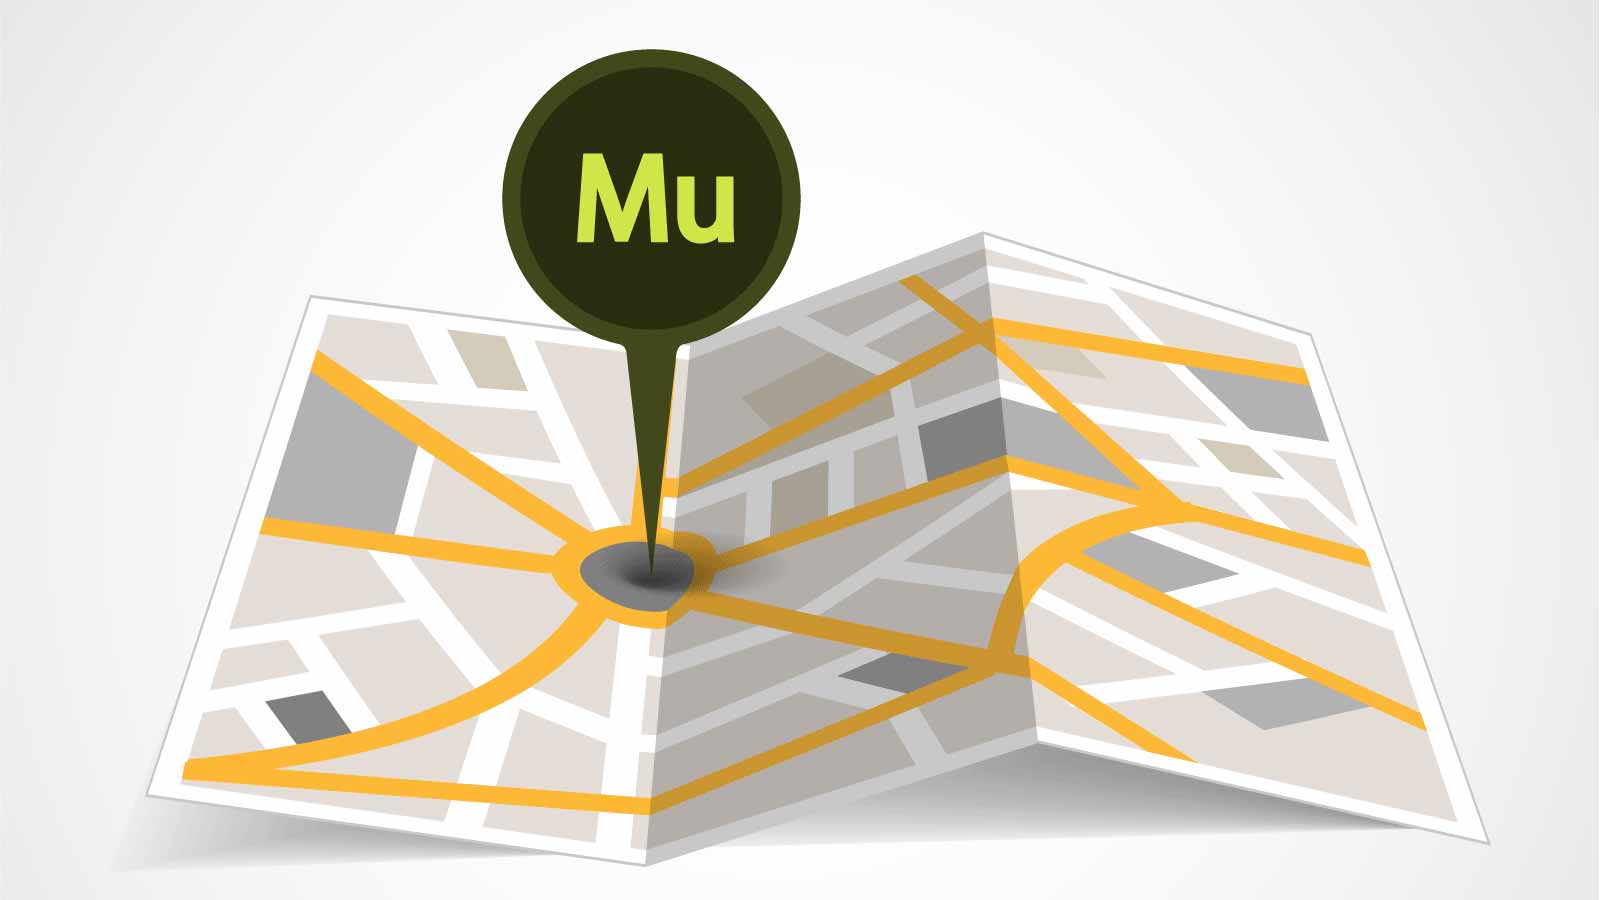 Learn more about the Complete List of Local Business SEO Adobe Muse widget